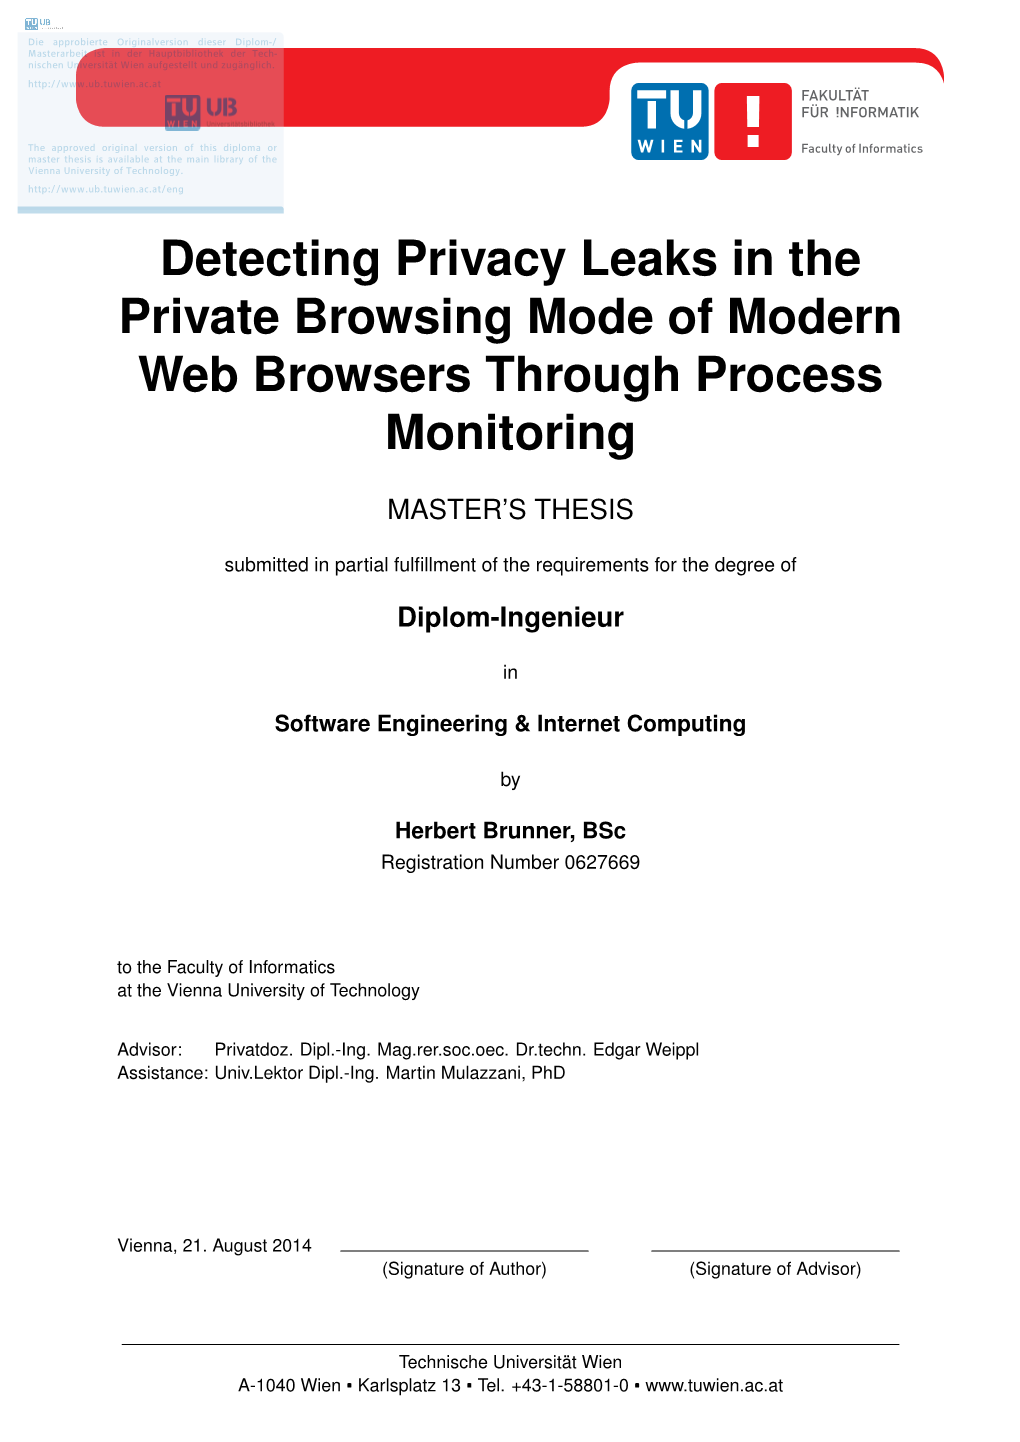 Detecting Privacy Leaks in the Private Browsing Mode of Modern Web Browsers Through Process Monitoring